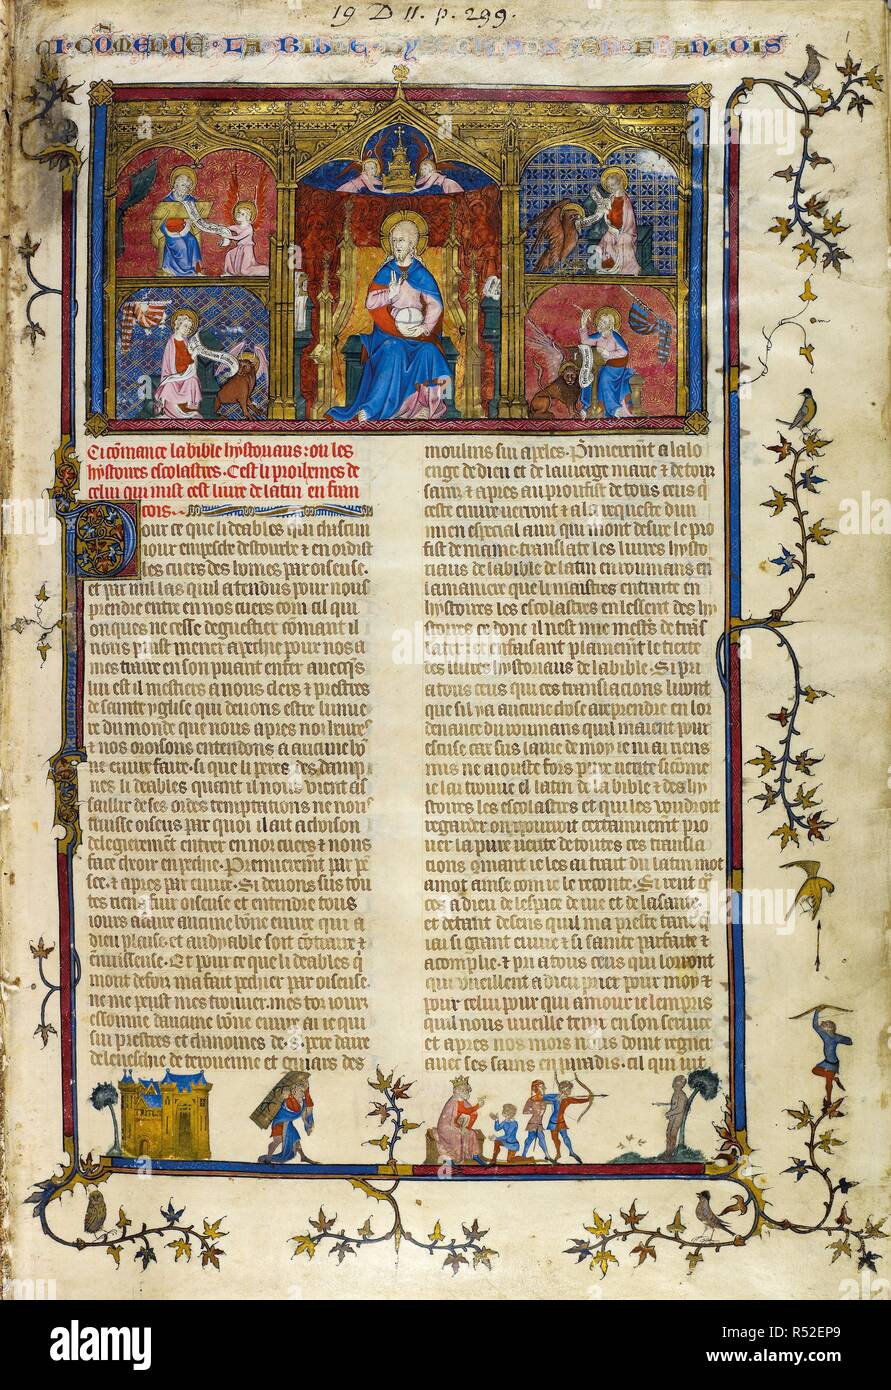 Miniature of God enthroned holding a globe with two angels supporting a papal tiara above him, and four Evangelists writing on scrolls with their symbols; two scenes in the bas-de-page, Samson with the gates of Gaza and Solomon setting the three sons to shoot at their father's corpse to prove their legitimacy; and a foliate initial 'P'(our) with a full border, at the beginning of the prologue. Bible historiale complÃ©tÃ©e moyenne (the 'Bible Historiale of John the Good'). France, Central (Paris); c. 1350-before 1356. Source: Royal 19 D. II, f.1. Language: French. Author: GUYART DES MOULINS. Stock Photo